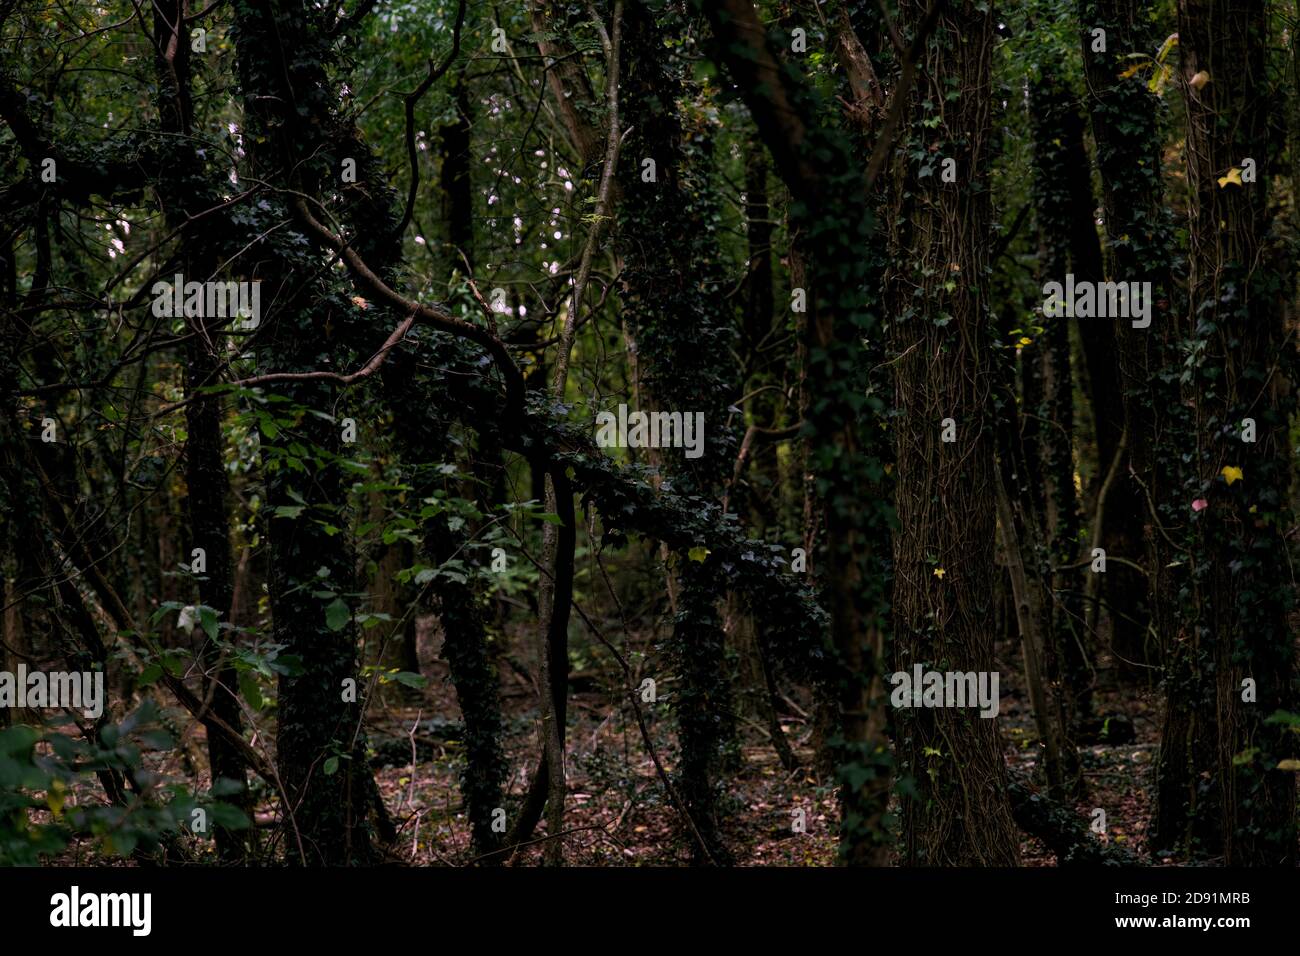 Spooky dark forest with tall trees and vines. Horizontal composition, full frame Stock Photo